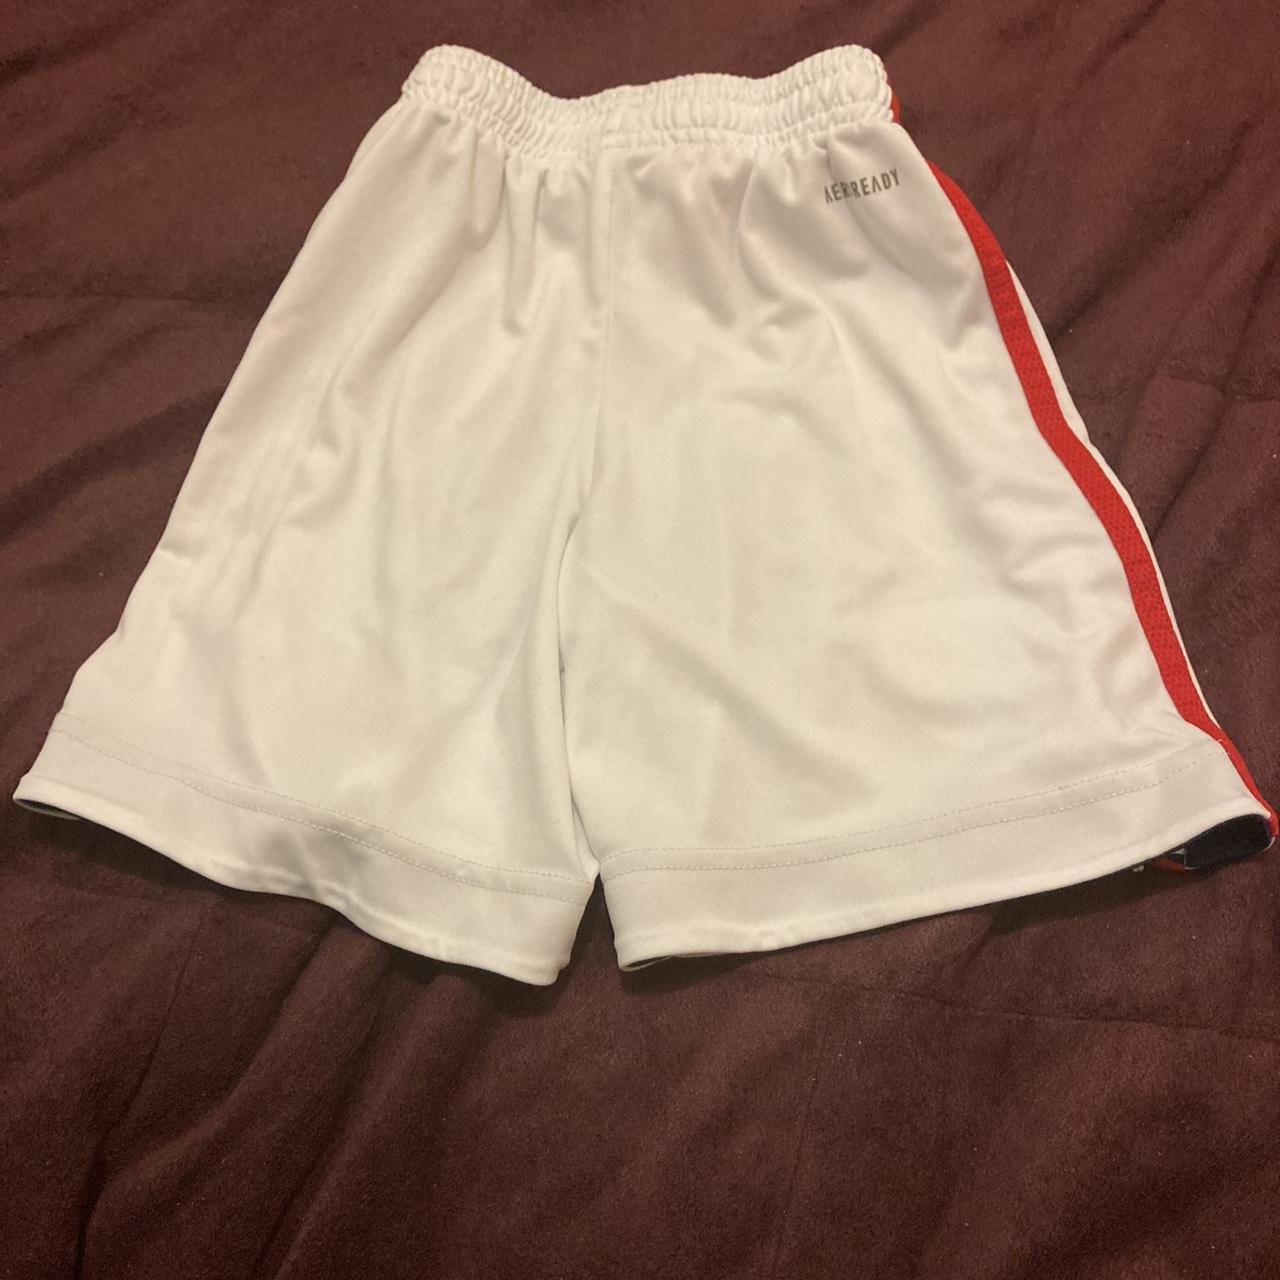 Adidas Arsenal Official White Home Shorts 21/22... - Depop